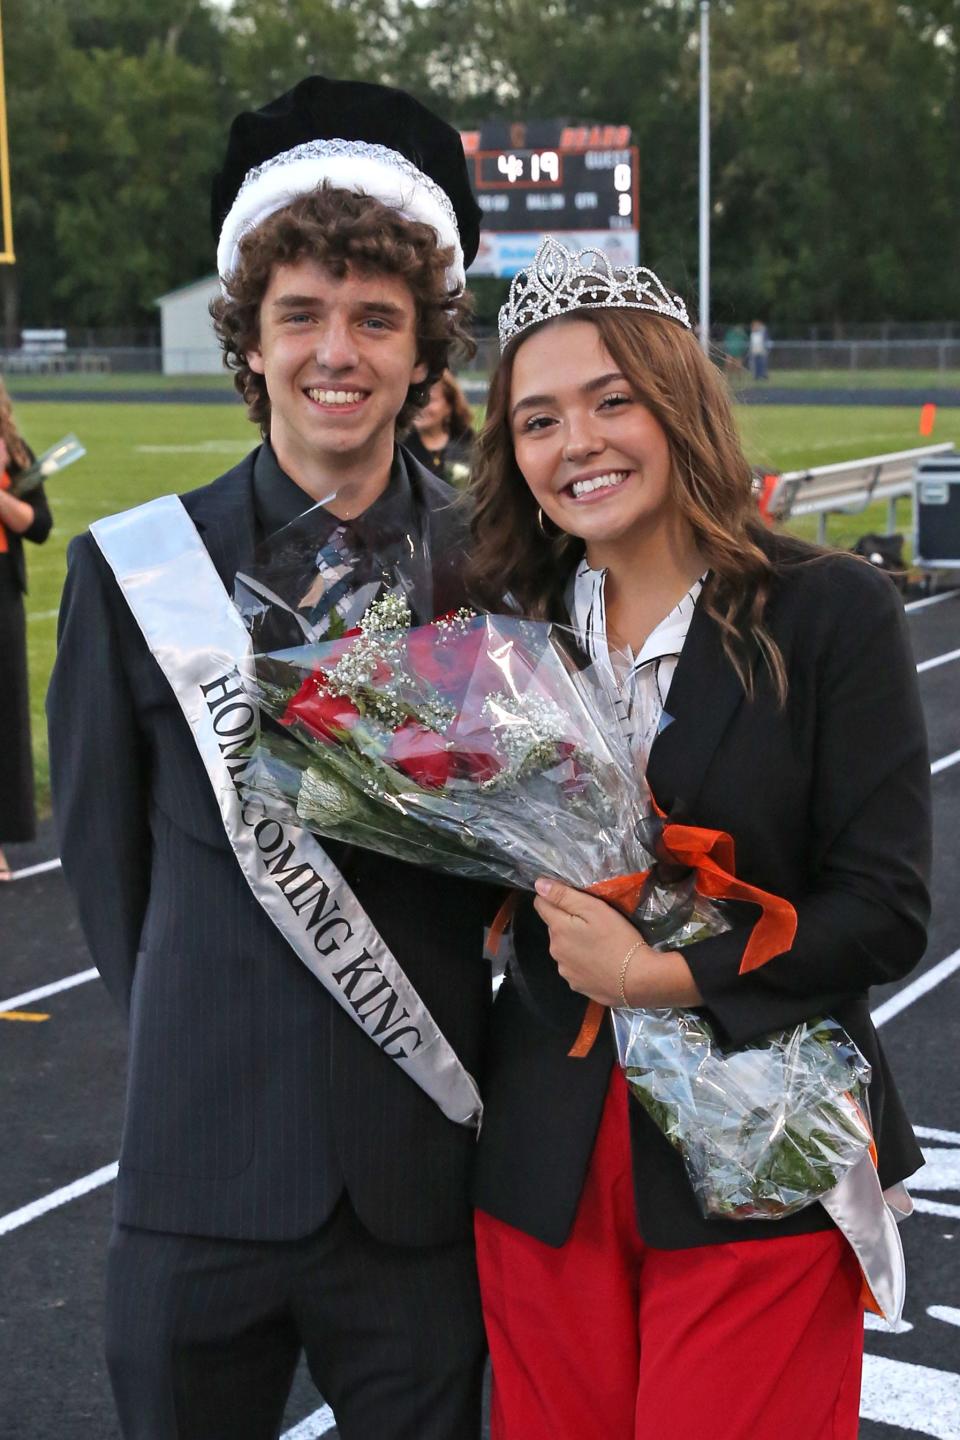 Chase Witte, son of David and Kristy Witte, and Jade Kayser, daughter of Chris and Traci Kayser, were crowned Homecoming King and Queen at Gibsonburg's homecoming game on Oct. 6.